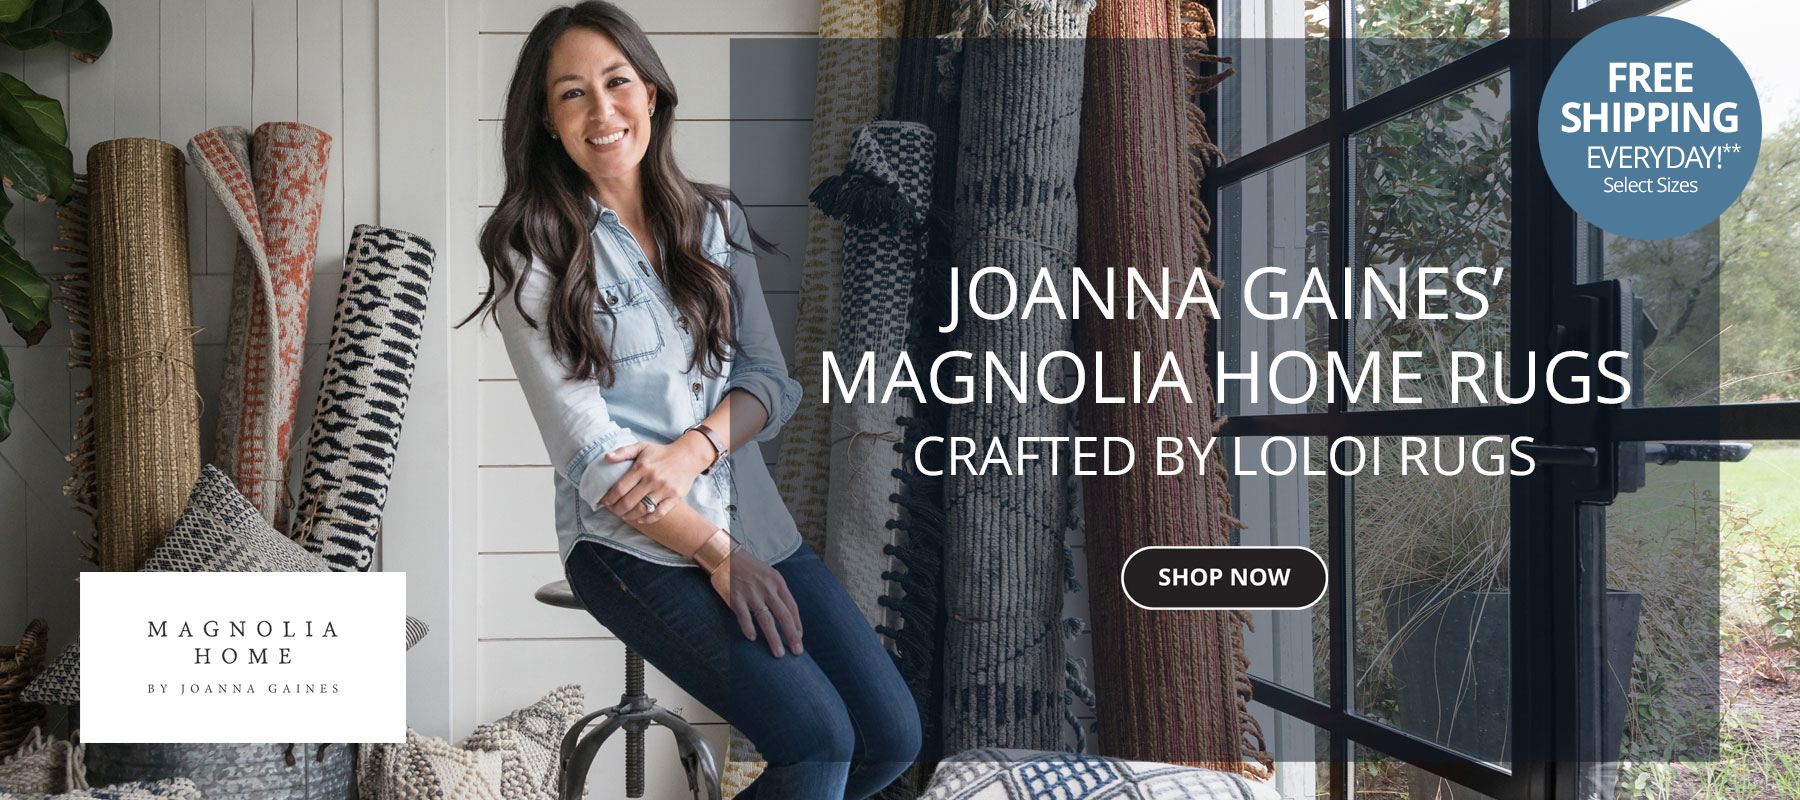 Joanna Gaines' Magnolia Home Rugs. Crafted by Loloi Rugs, Free Shipping Everyday!** Select Sizes. Shop Now.